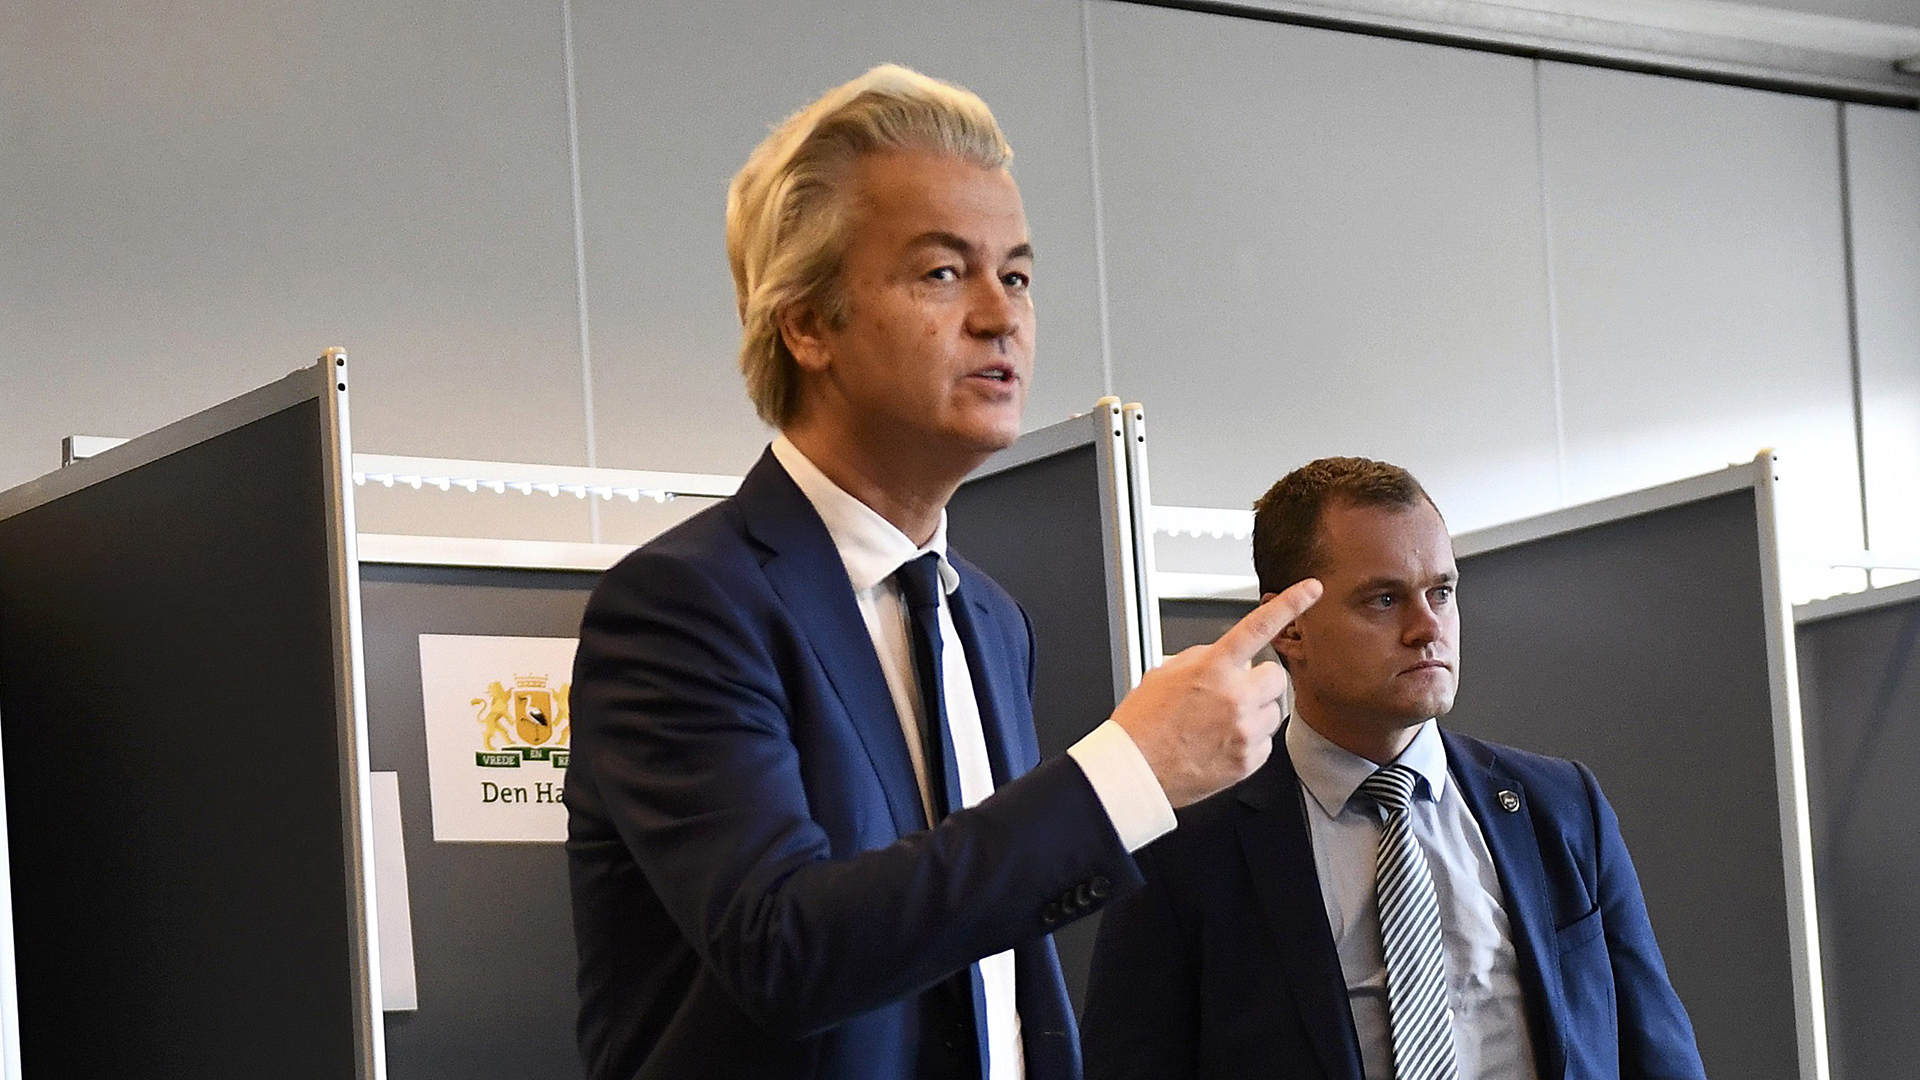 Dutch far-right politician Geert Wilders of the PVV party votes in the general election in The Hague, Netherlands, March 15, 2017. REUTERS/Dylan Martinez